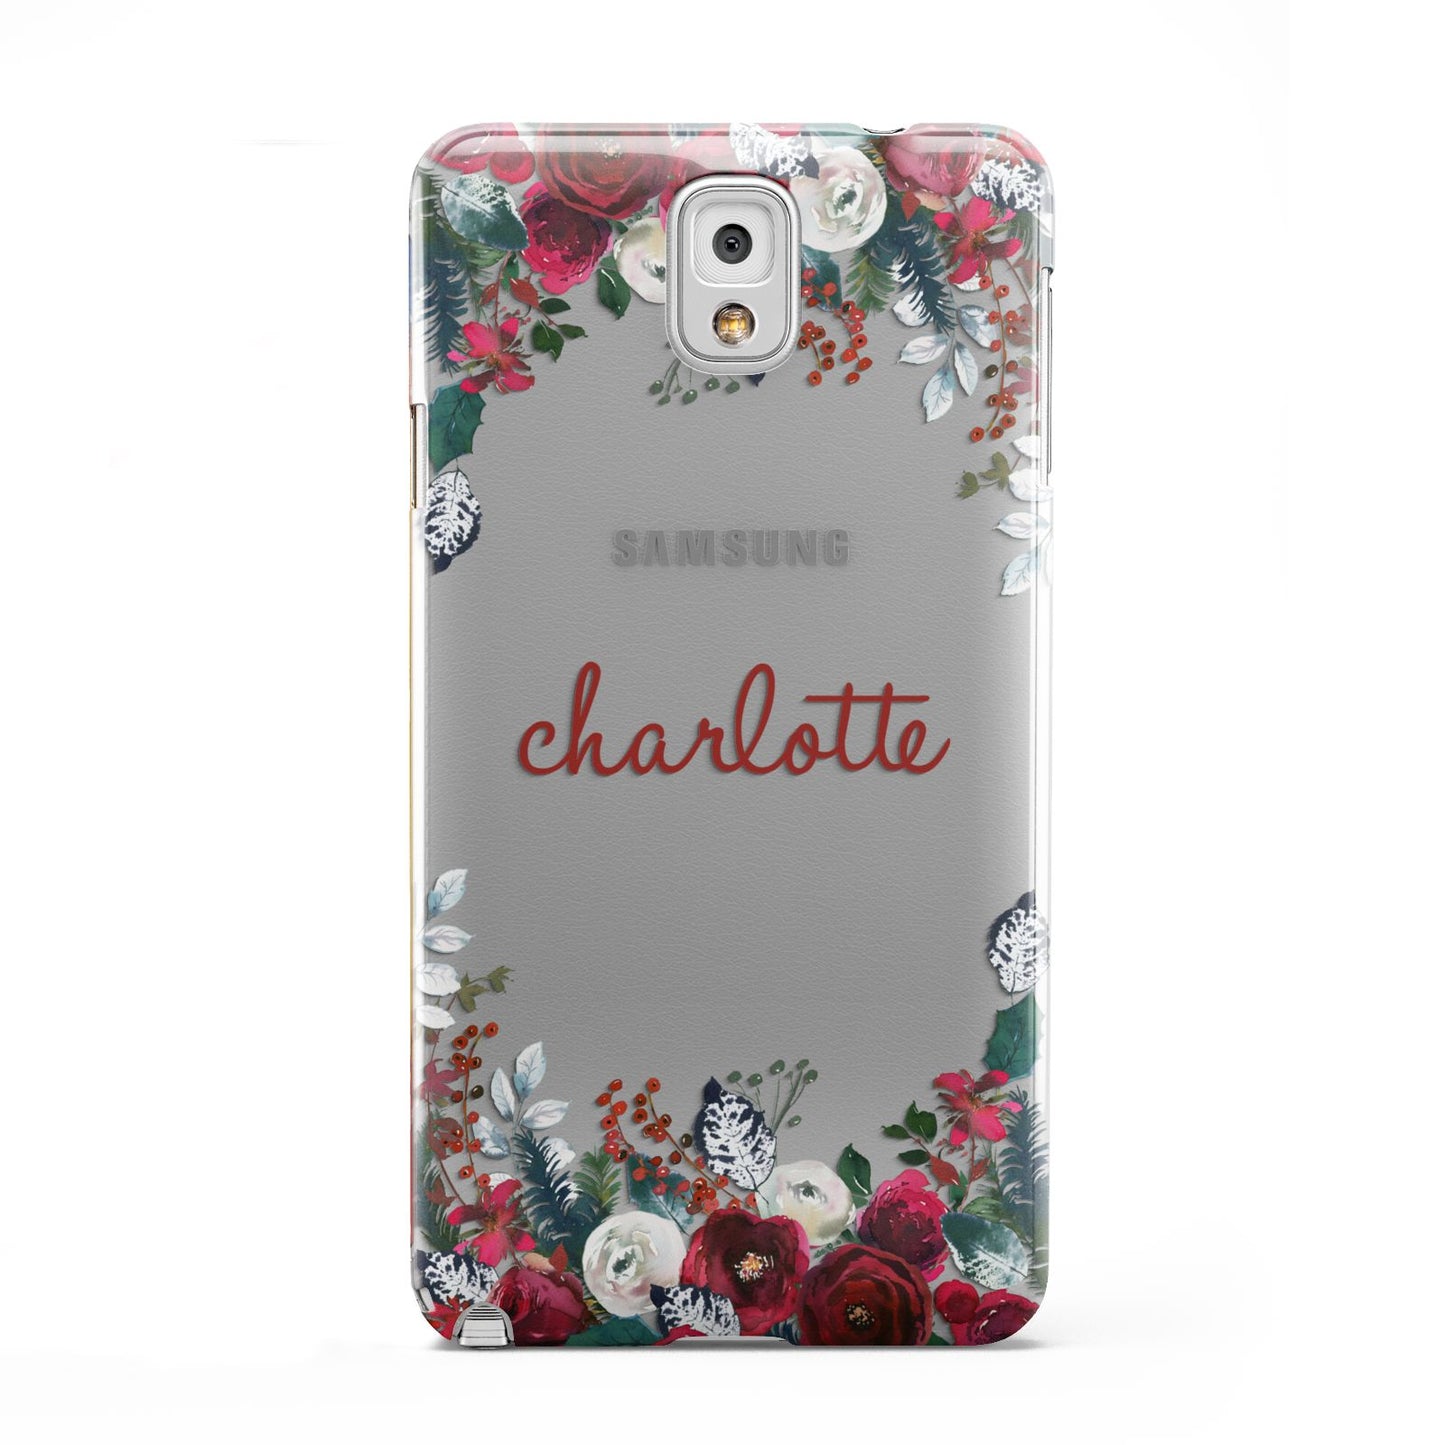 Christmas Flowers Personalised Samsung Galaxy Note 3 Case